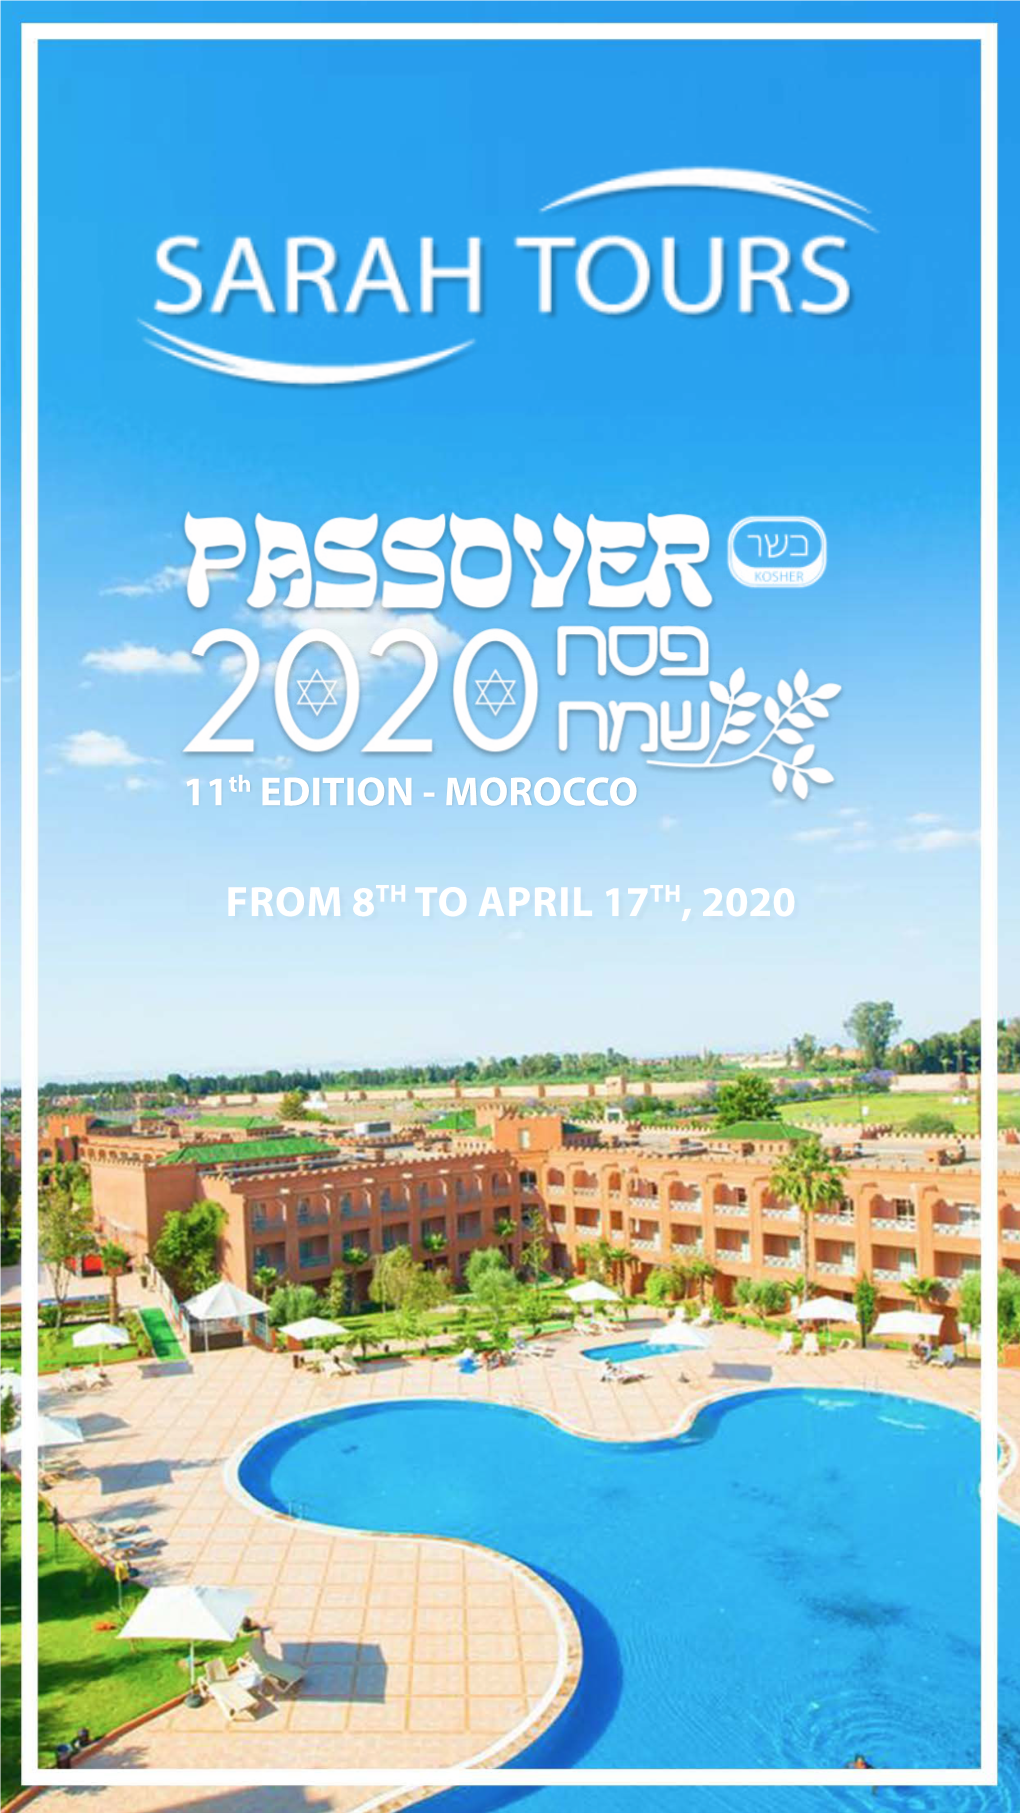 From 8Th to April 17Th, 2020 Mogador Agdal Congress & Spa Marrakech City in the Center of Morocco